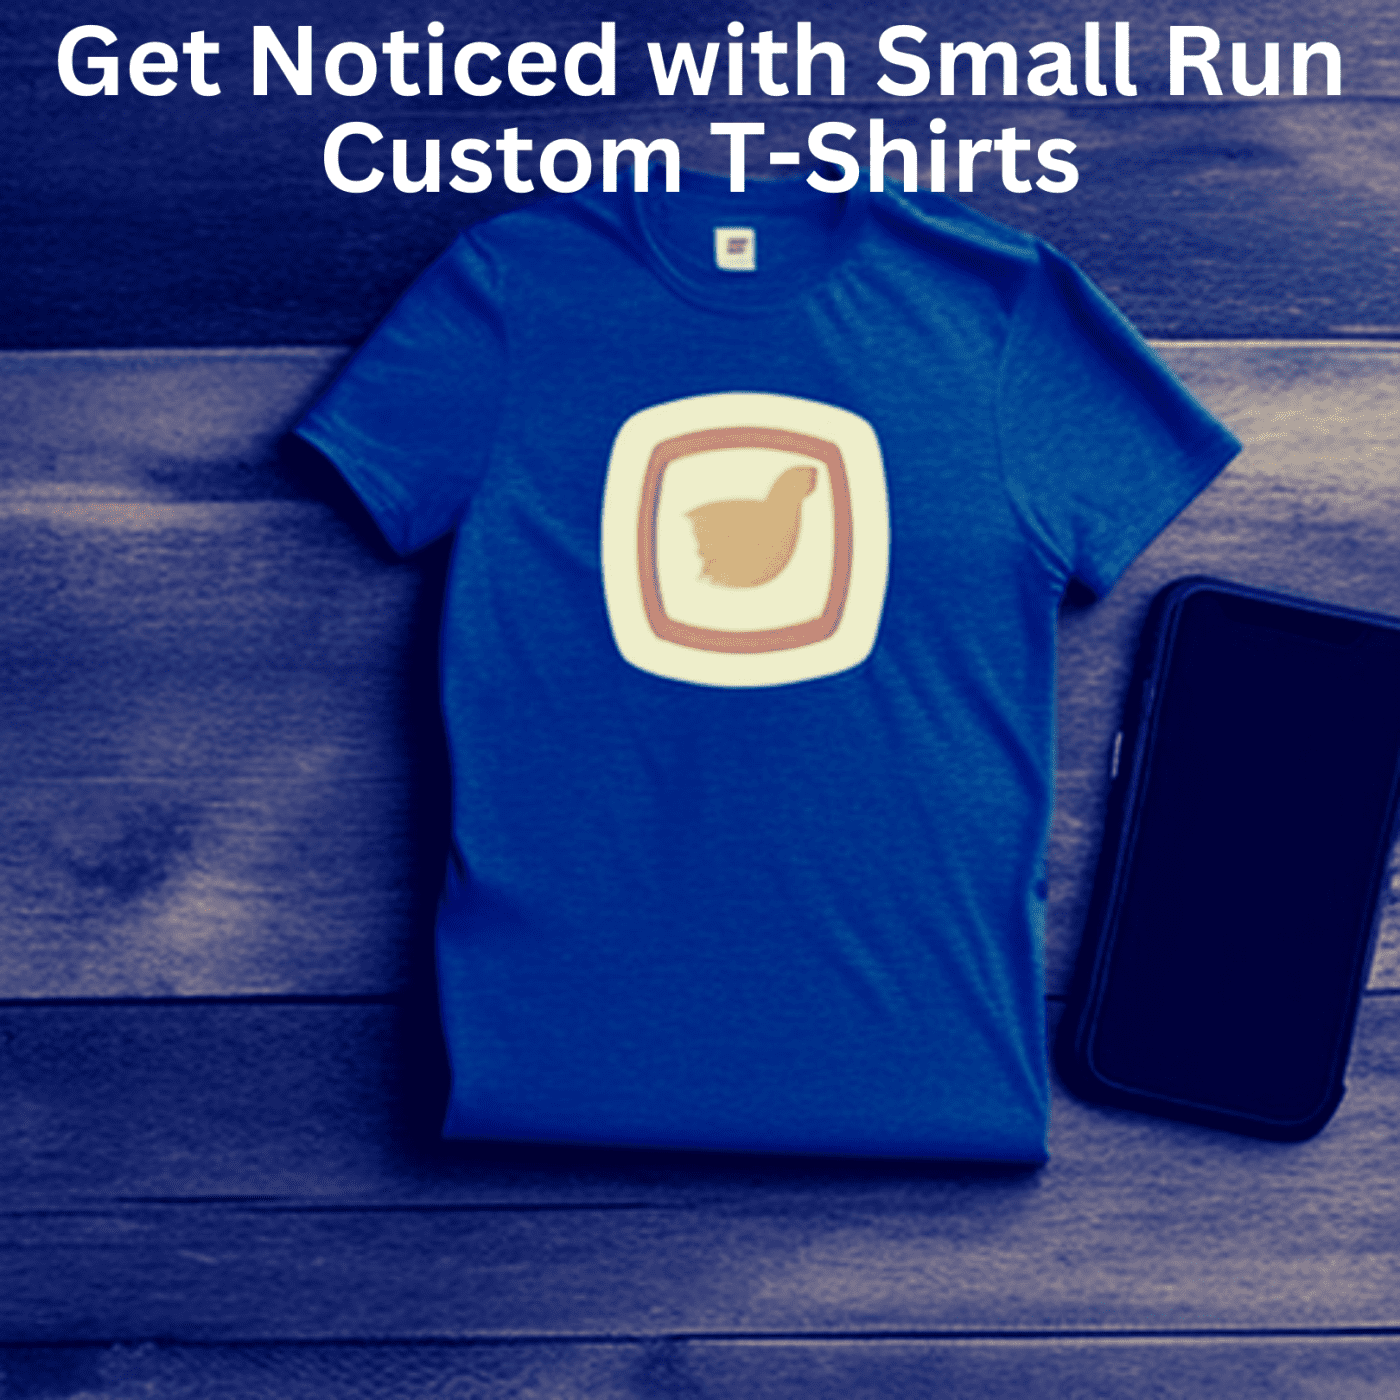 Get Noticed with Small Run Custom T-Shirts